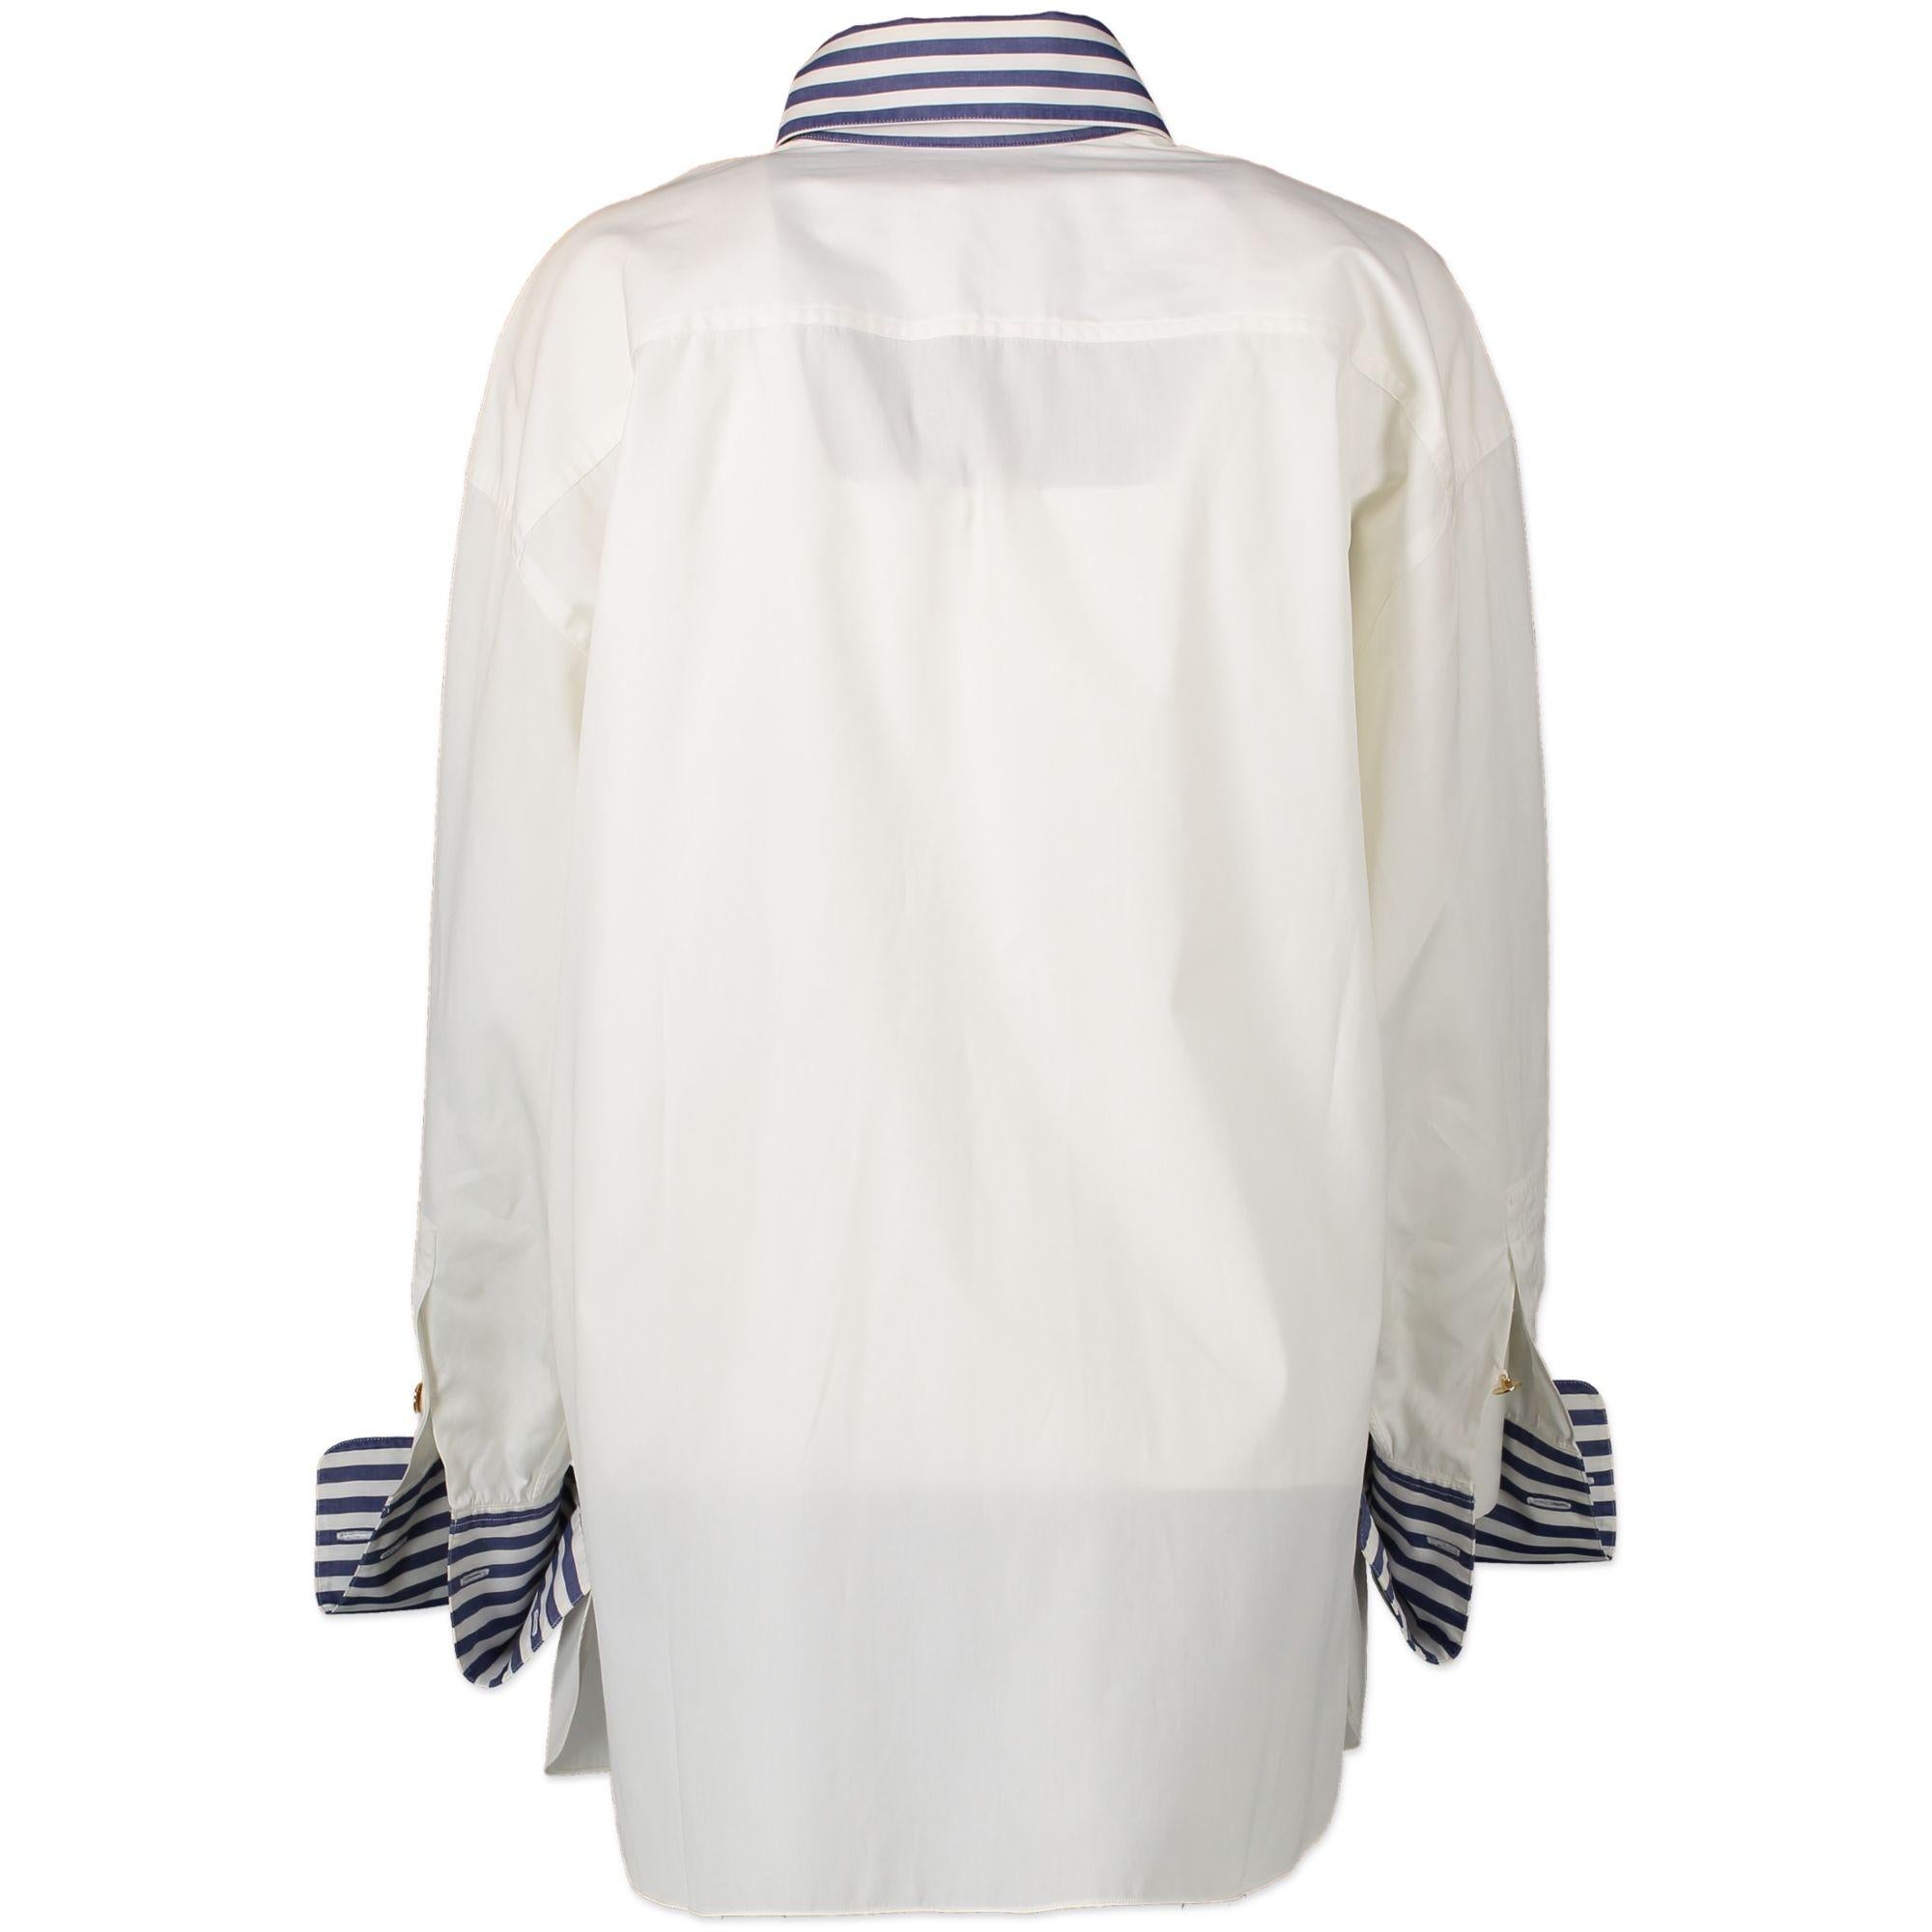 Very good condition

Chanel White Cotton Nautical-Inspired Button-Down Shirt

Be ready for a stroll on the boardwalk or a trip to the harbour - Saint Tropez style! This nautical inspired shirt by Chanel features gold-toned buttons, cufflink sleeves